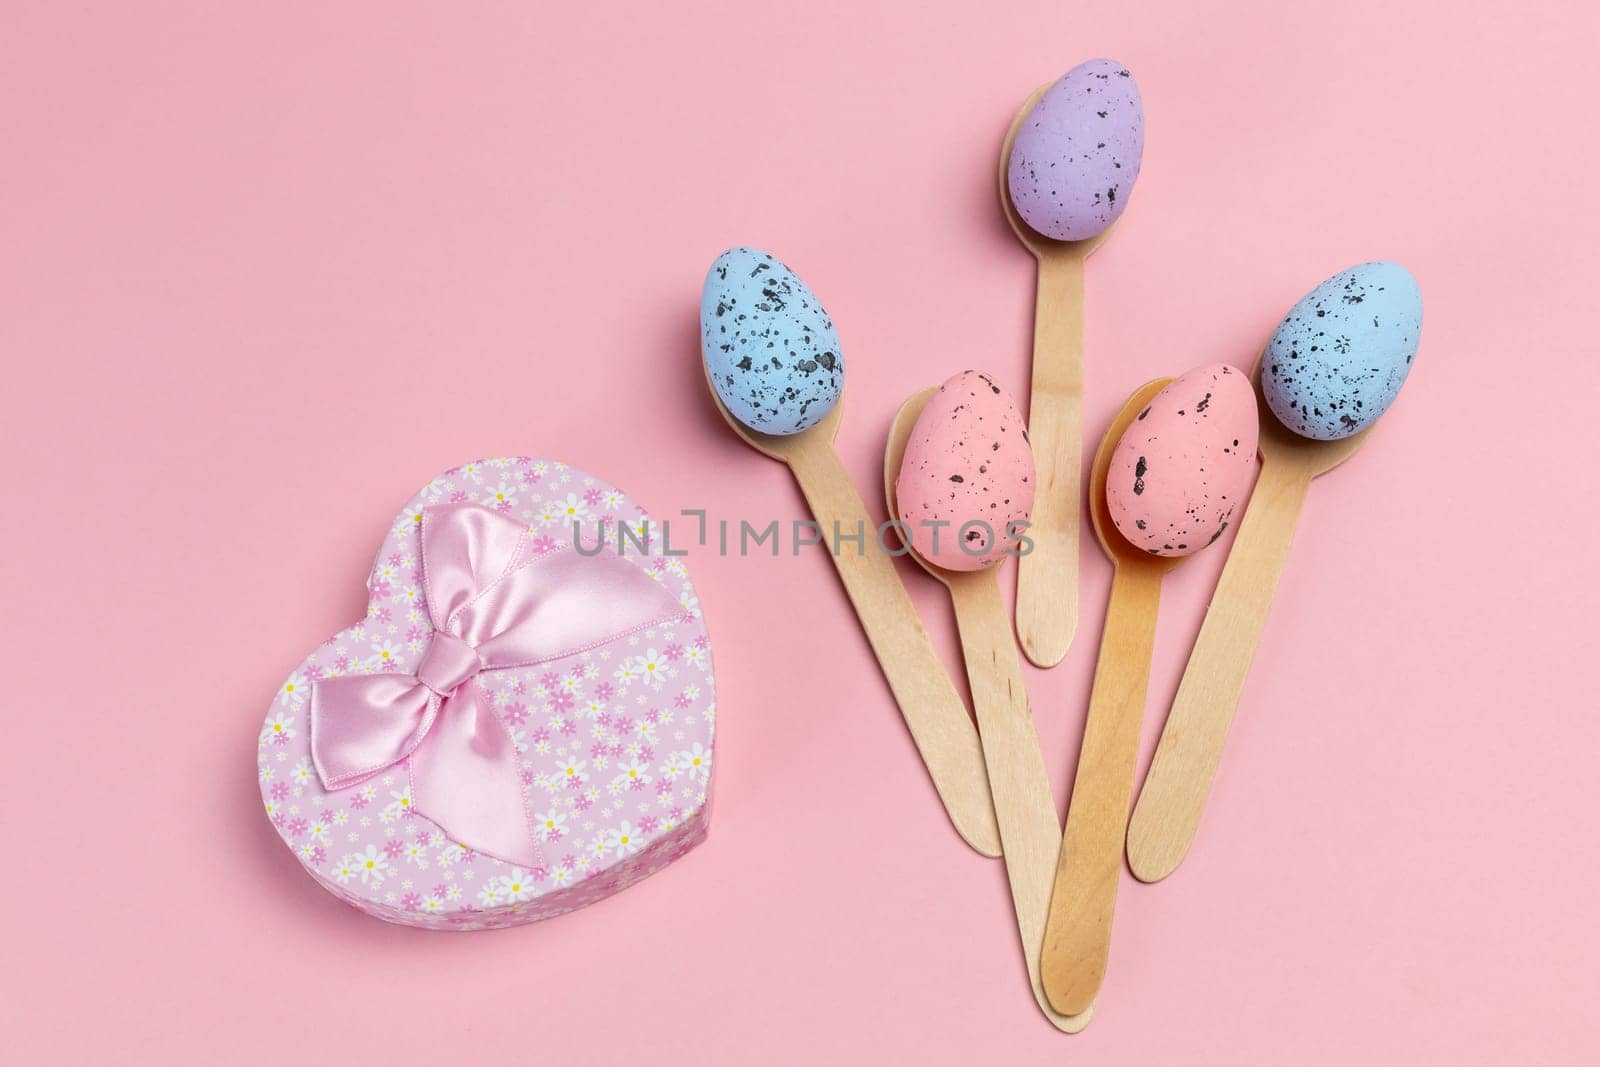 Colored Easter eggs on wooden spoons with a gift box on the pink background. Top view.